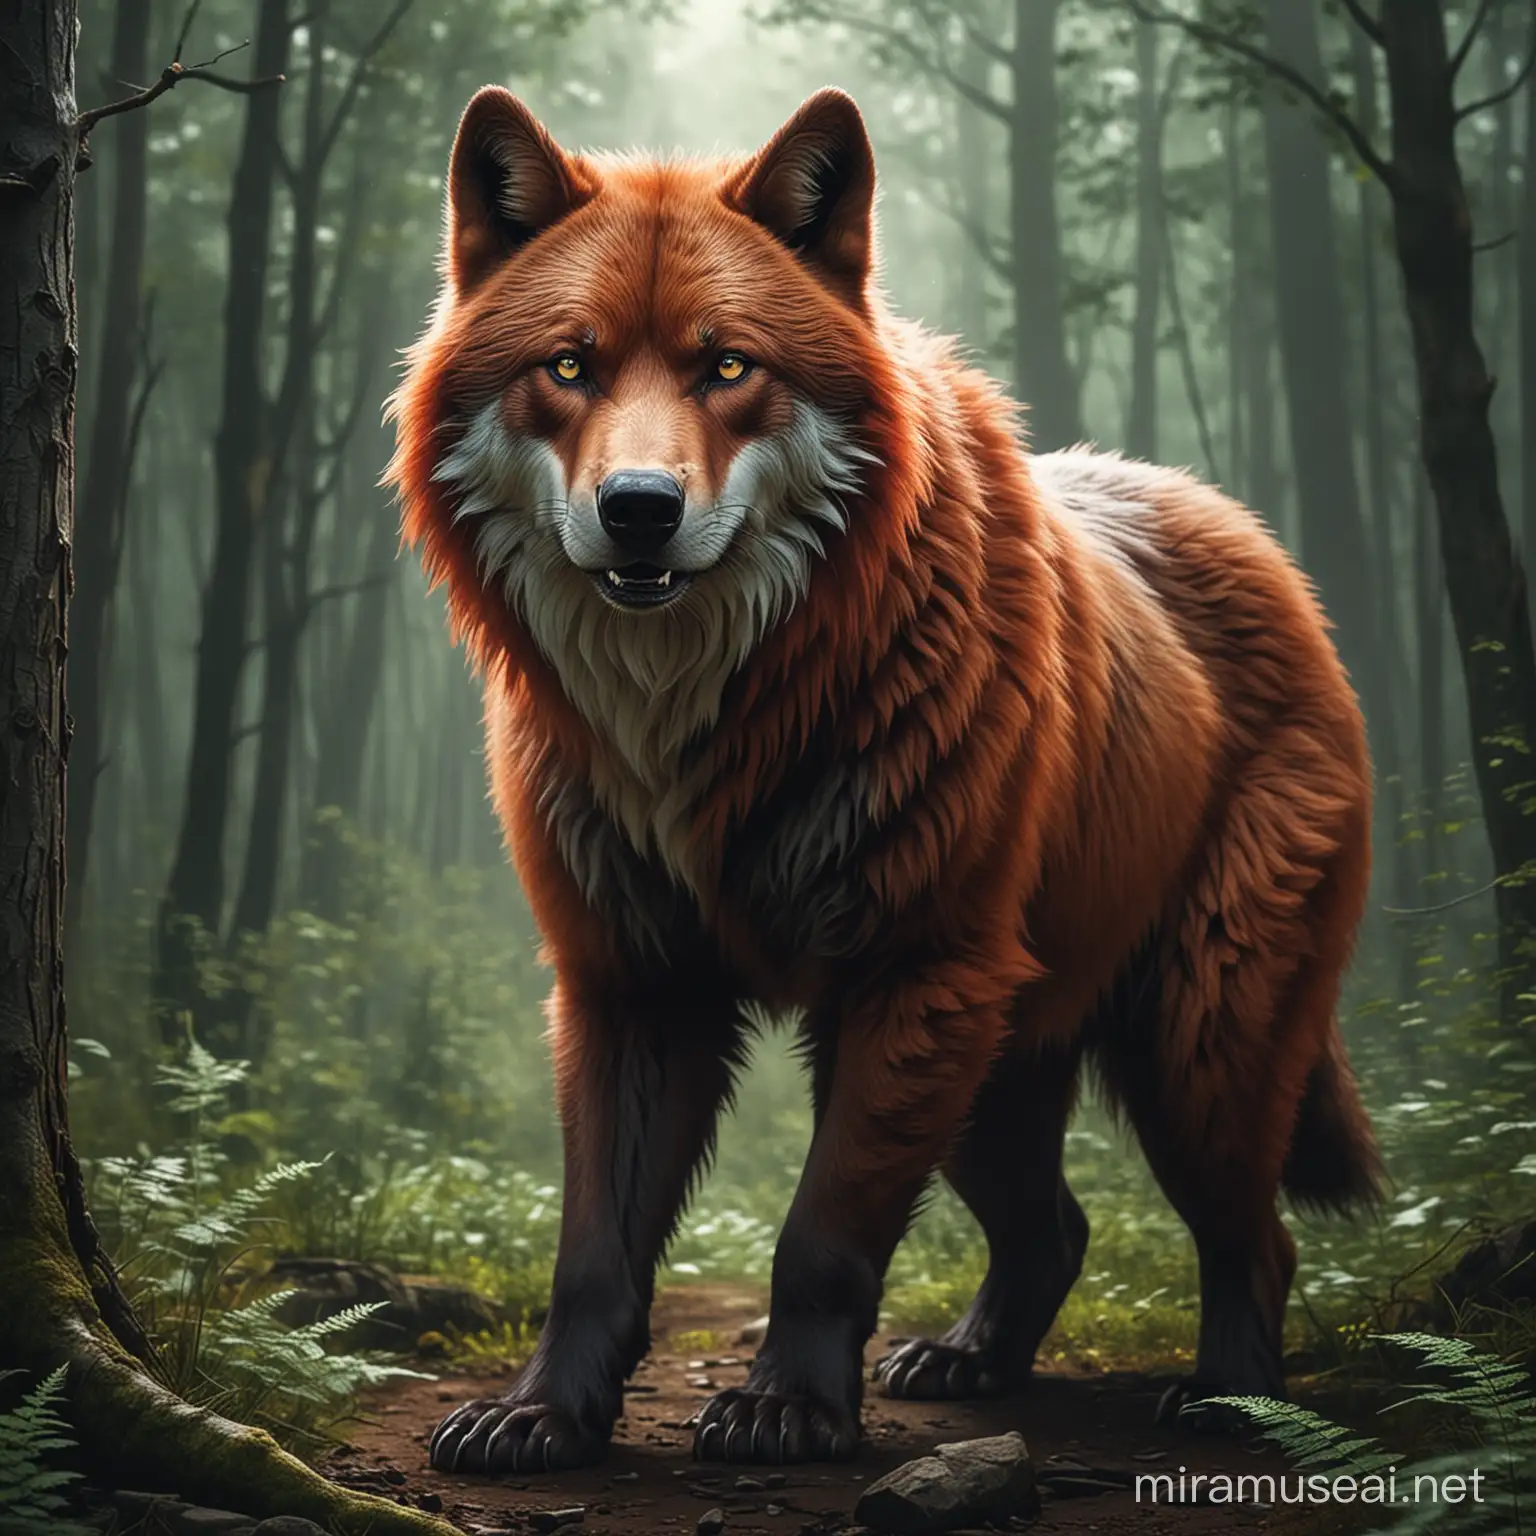 Create an image of a Dire Wolf. The Bear should look fierce, with red fur like a fox with a white chest and green eyes.
The bear must not be in humanoid form. He must be a normal animal.